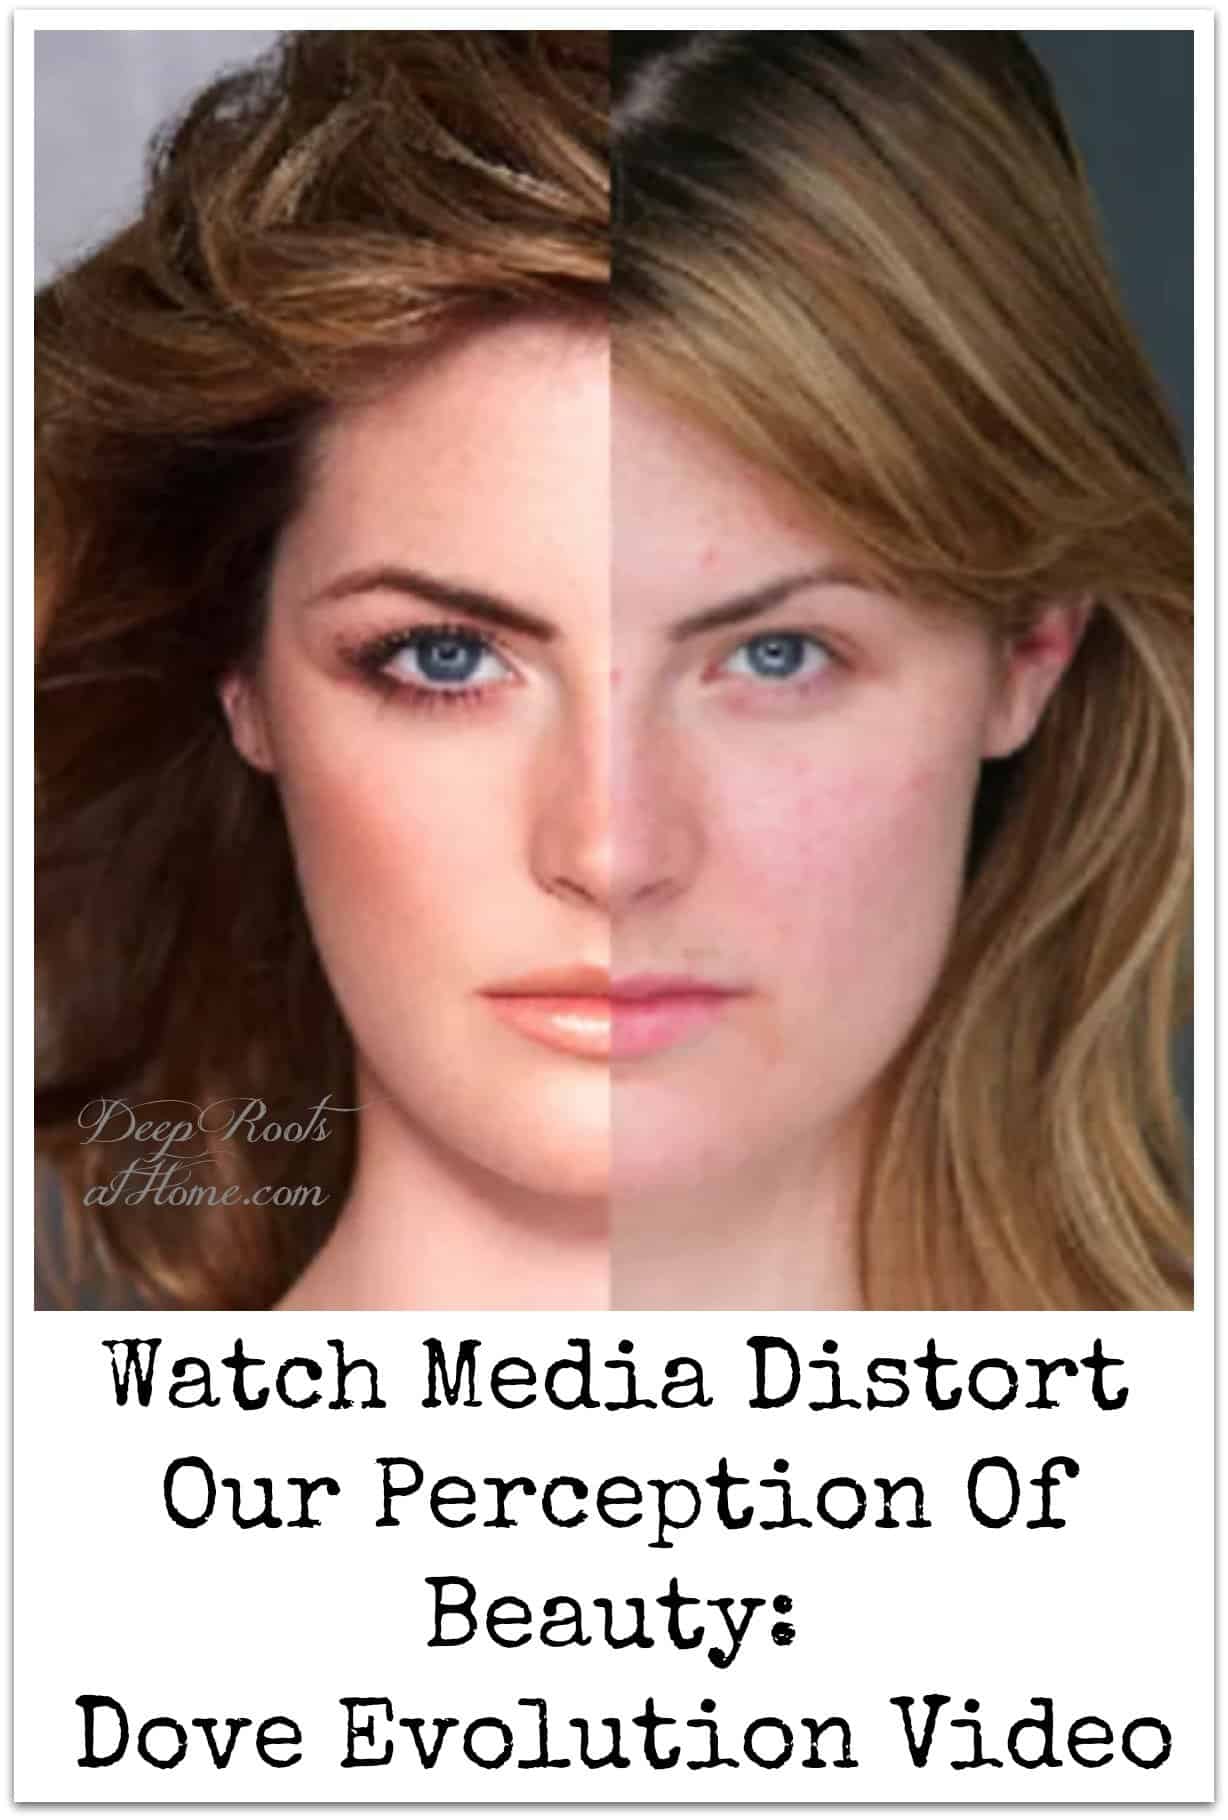 Watch Media Distort Our Perception Of Beauty: Dove Evolution Video. Going from average to billboard-worthy